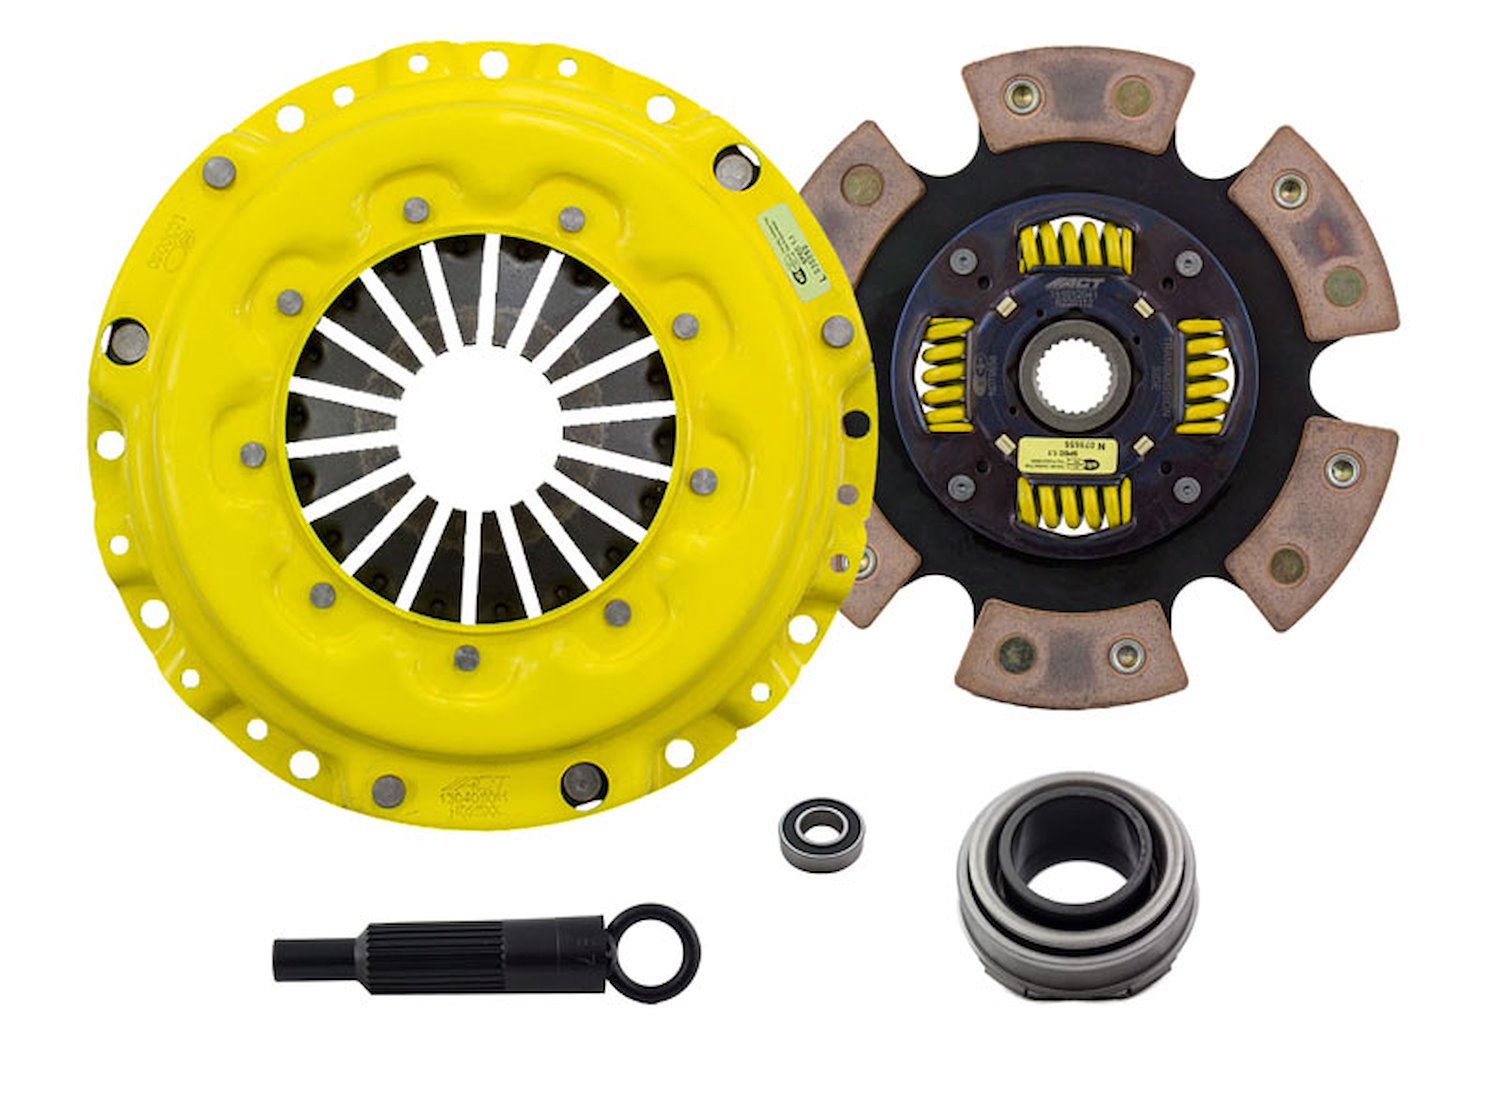 MaXX/Race Sprung 6-Pad Transmission Clutch Kit Fits Select